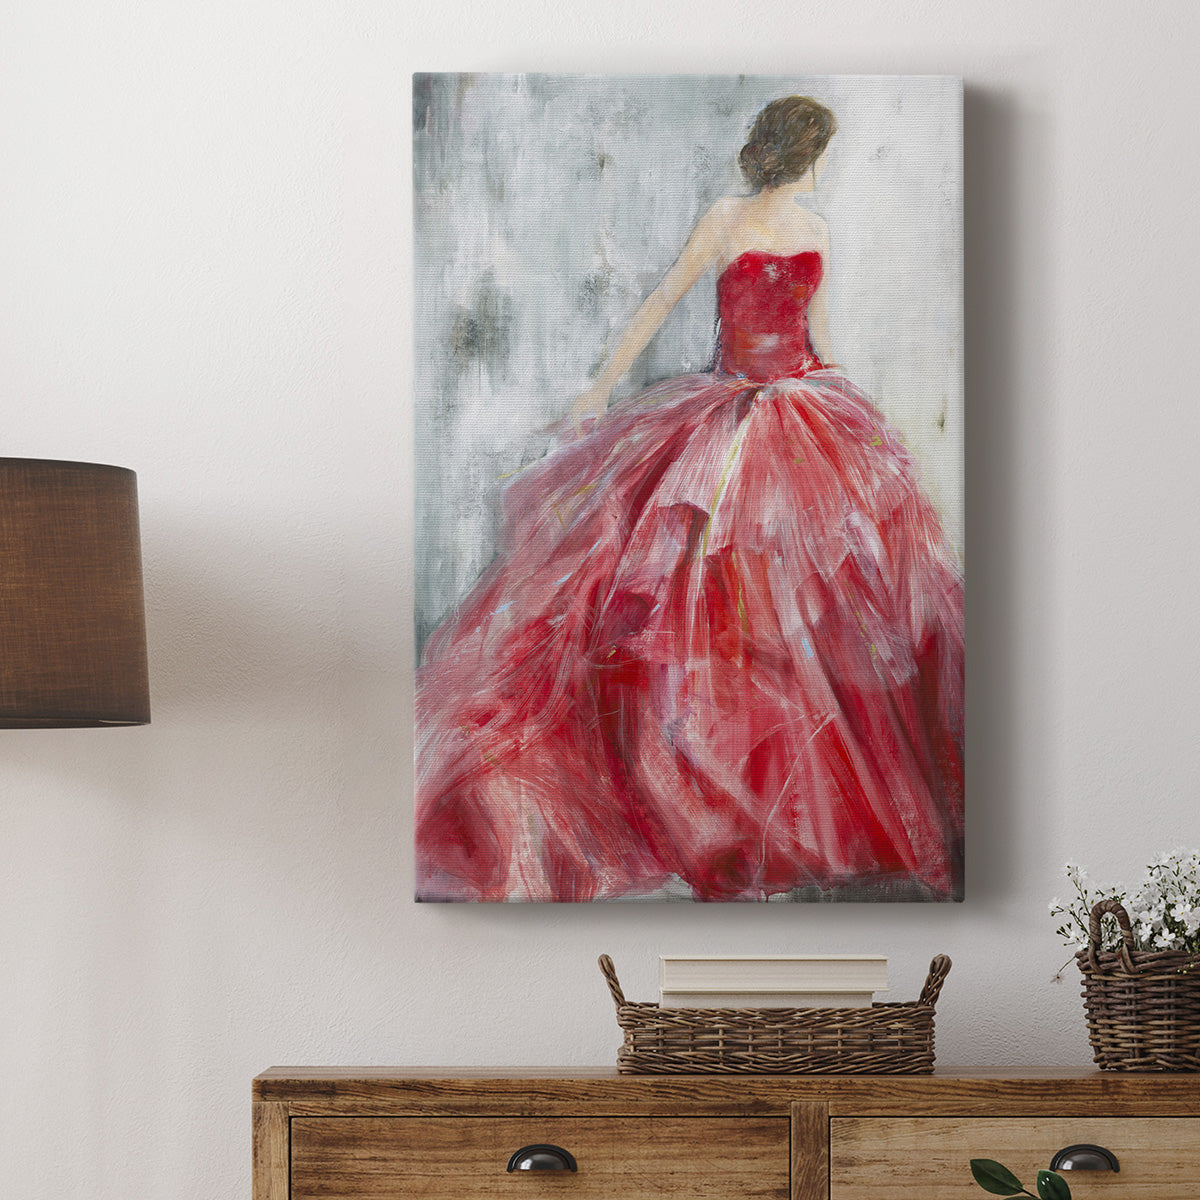 Redowa Premium Gallery Wrapped Canvas - Ready to Hang